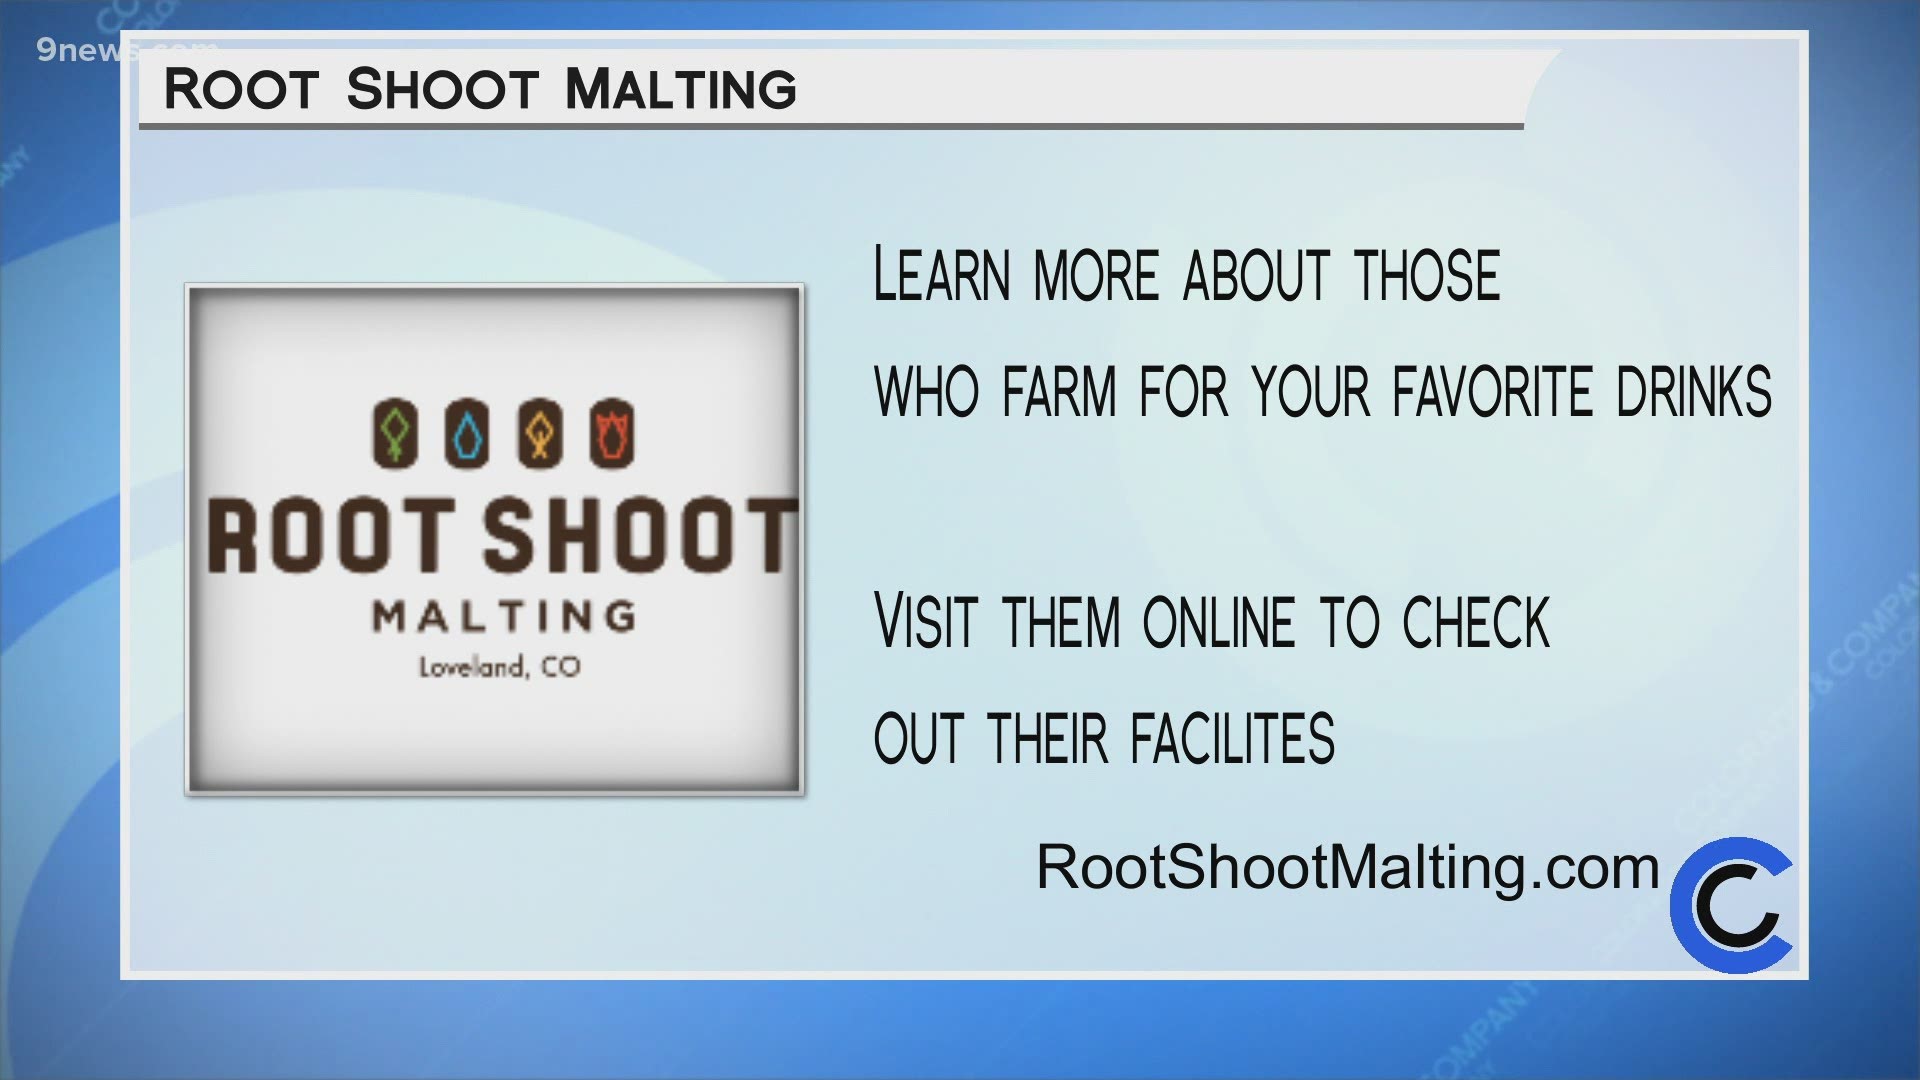 Seek out beers and spirits with locally produced craft malt. Learn more about Root Shoot at RootShootMalting.com.